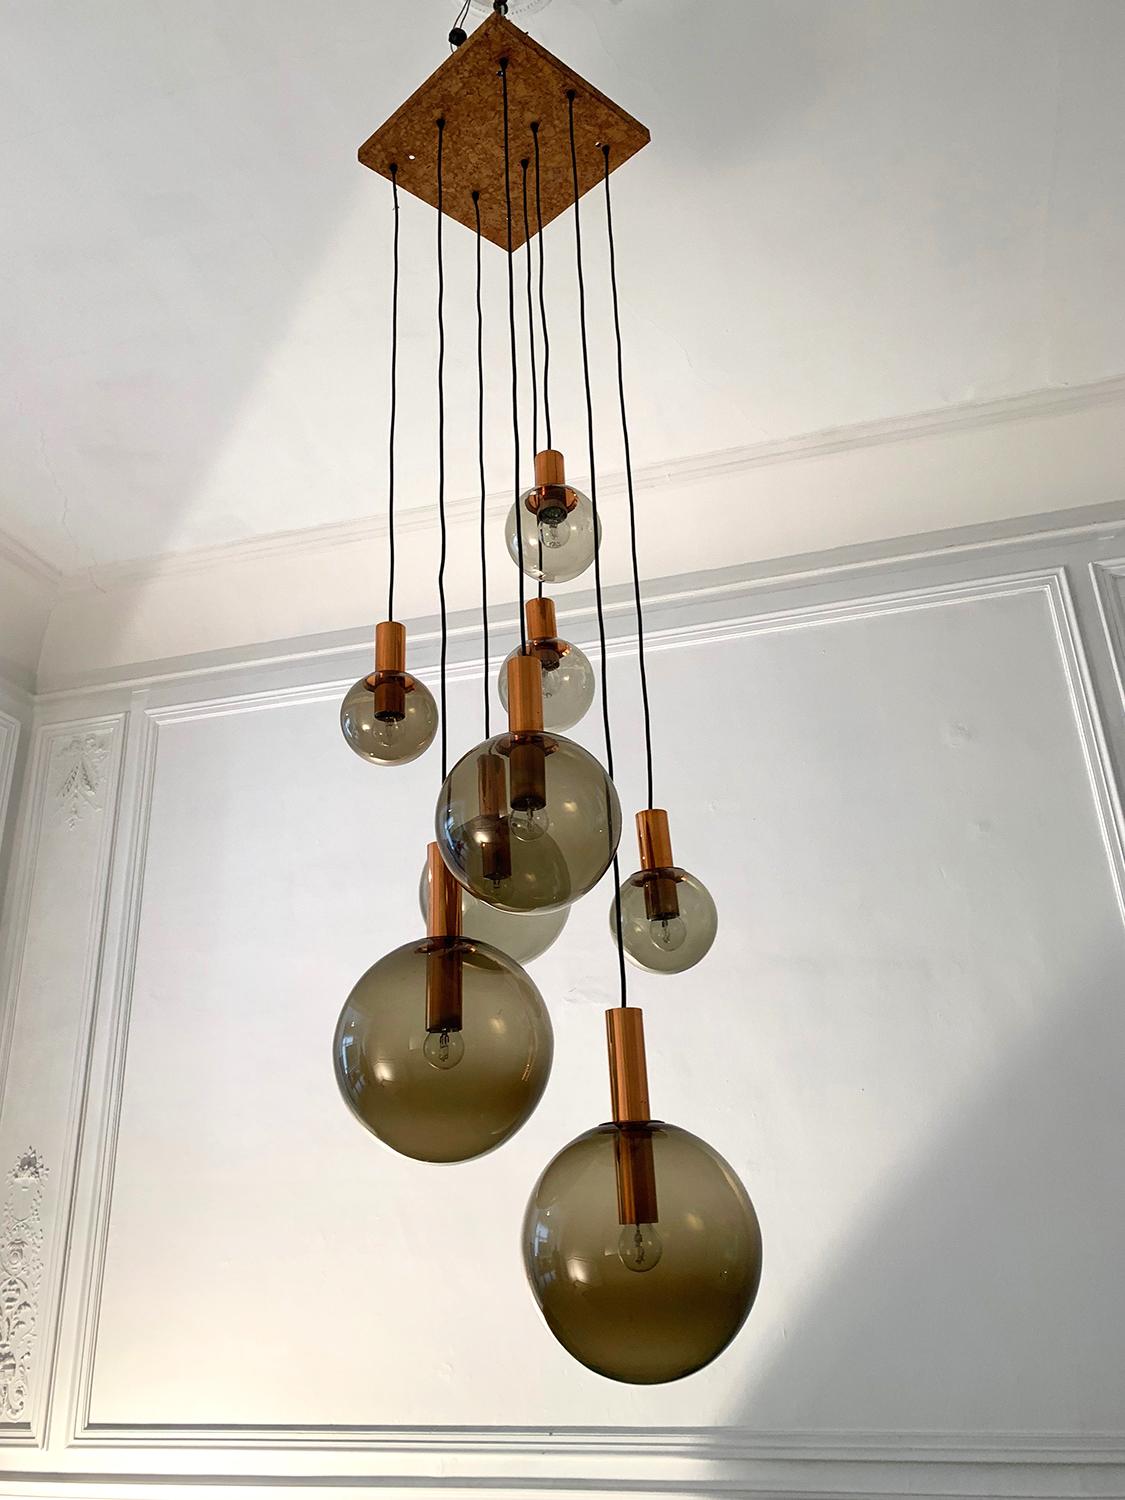 Beautiful ceiling lamp with 8 light points, produced by RAAK, 1970s. The ceiling lamp is made of a metal panel covered with cork from which hang 8 bright points in coppered metal finished with balls of smoked glass having different